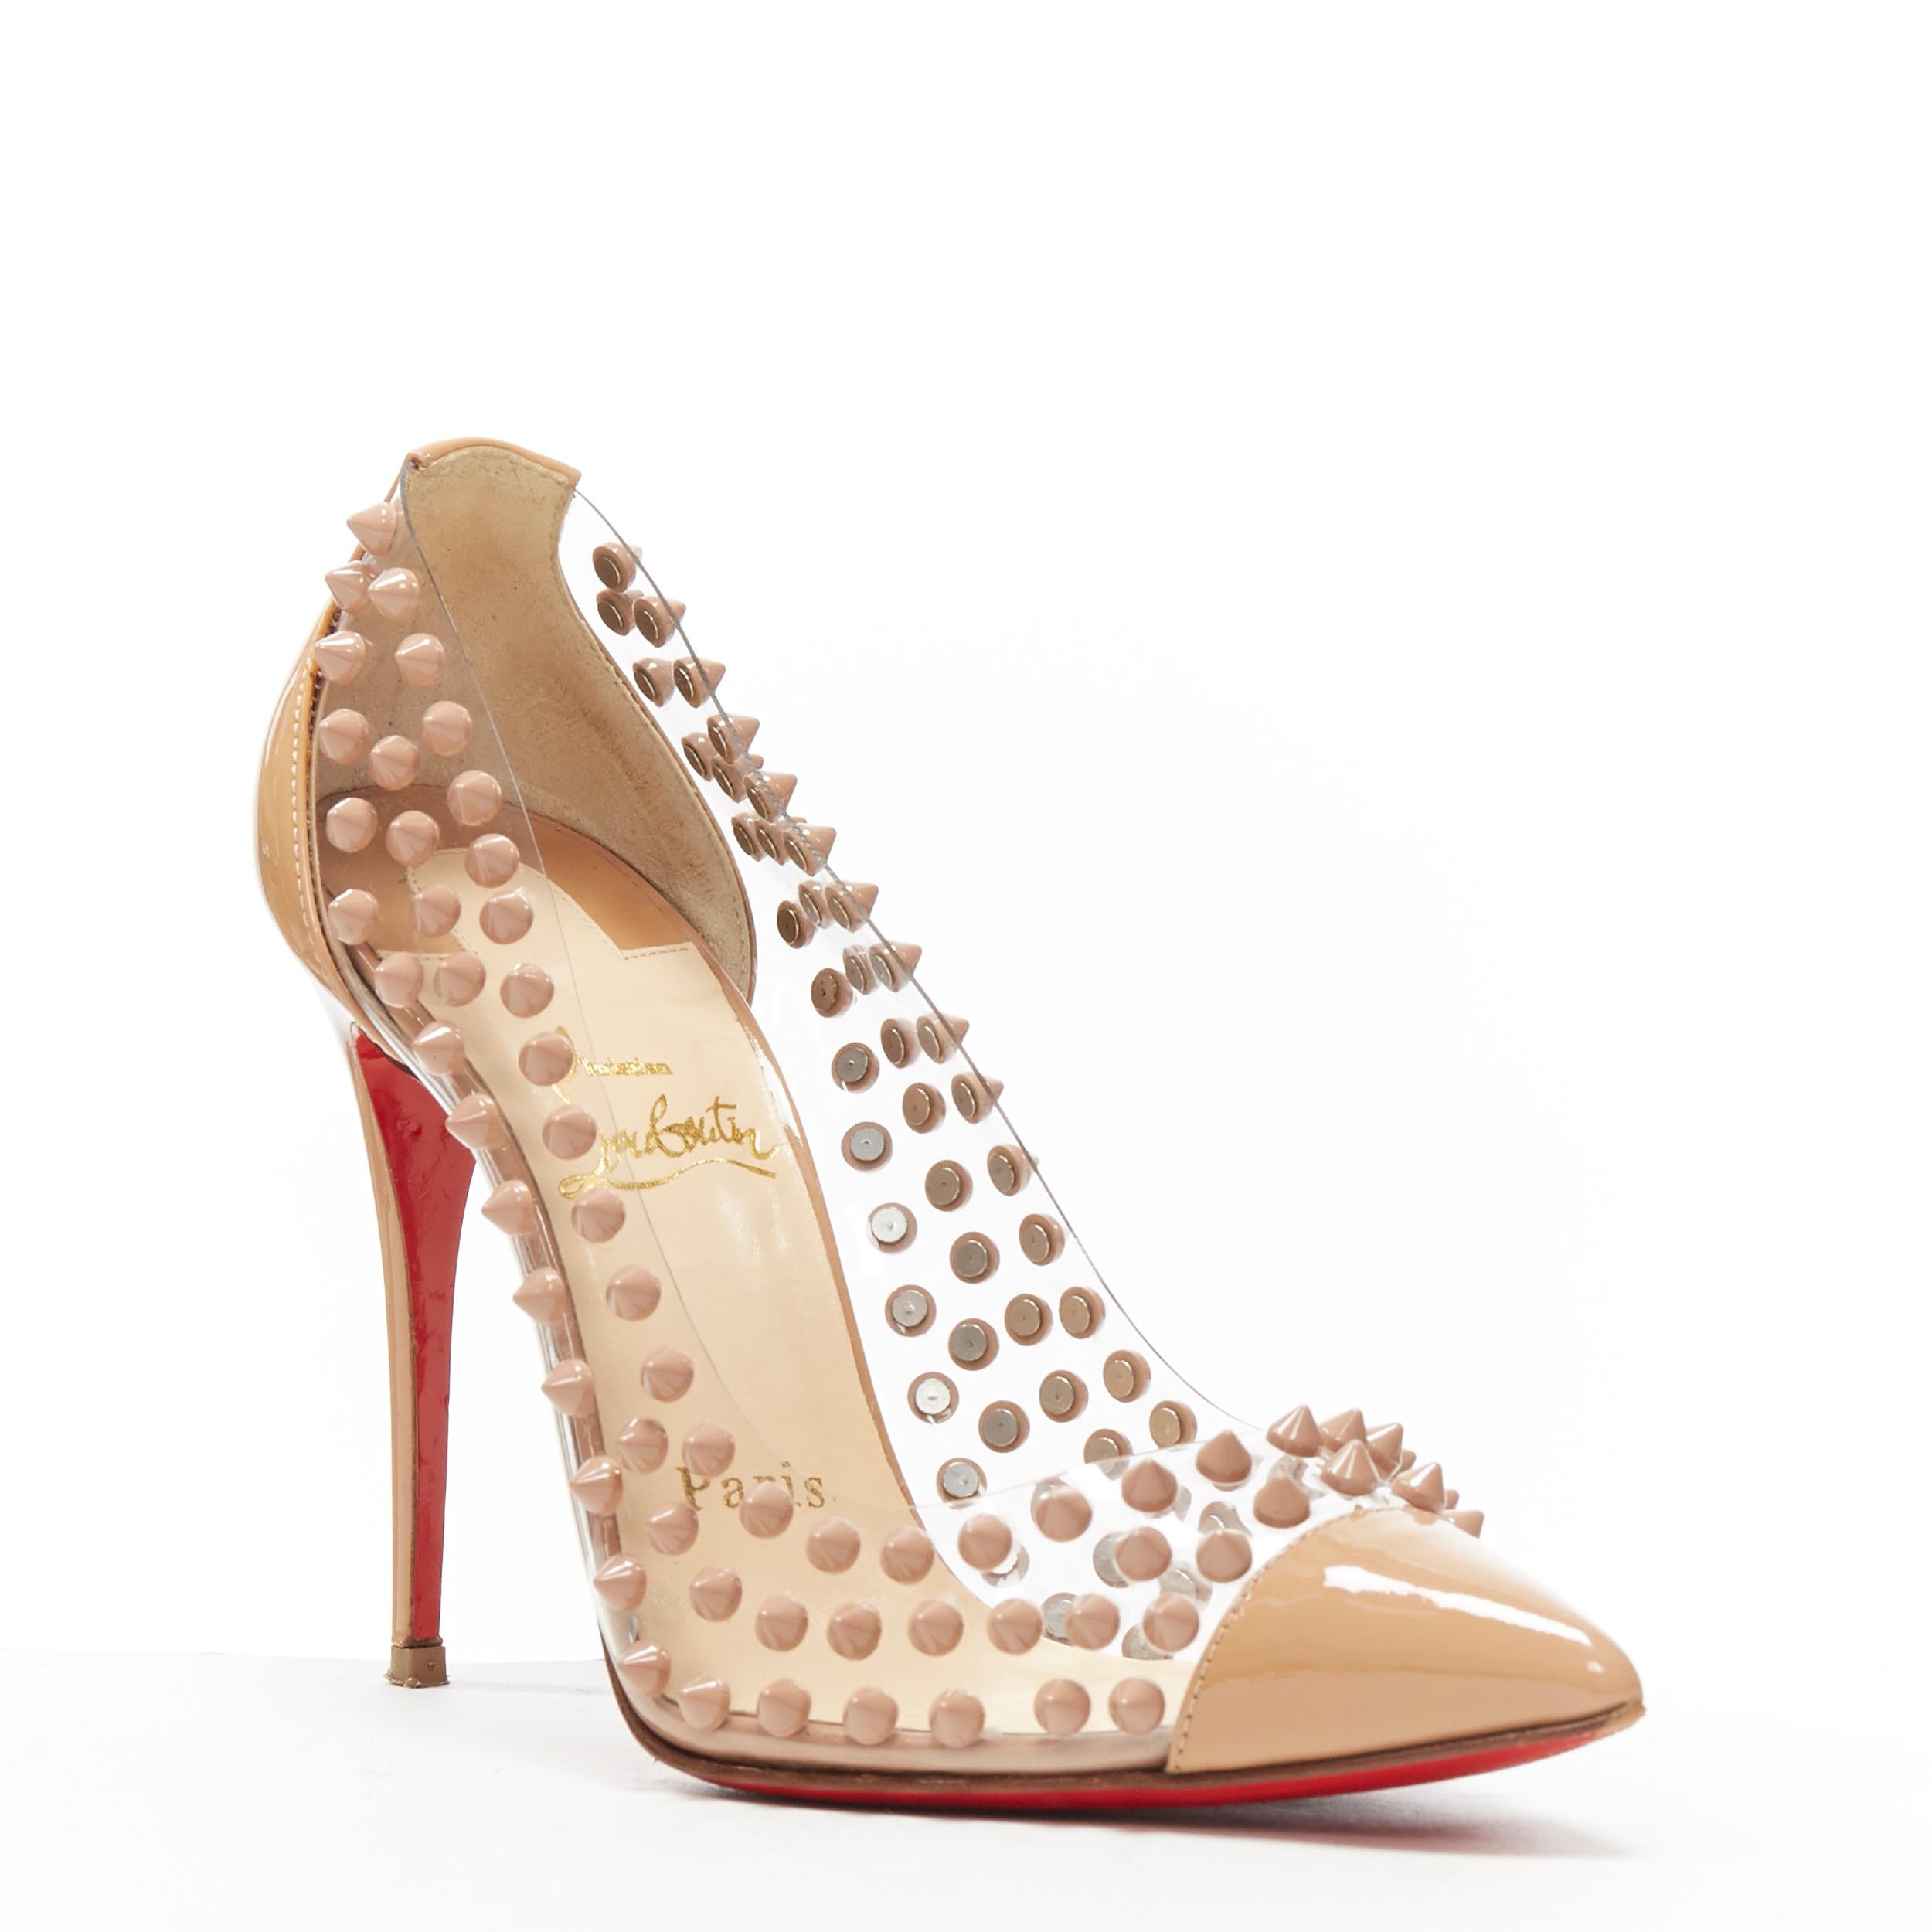 CHRISTIAN LOUBOUTIN Spike Me nude spike stud PVC patent toe pigalle pump EU36.5
Brand: Christian Louboutin
Designer: Christian Louboutin
Model Name / Style: Spike me
Material: PVC
Color: Beige
Pattern: Solid
Closure: Slip on
Extra Detail: Ultra High